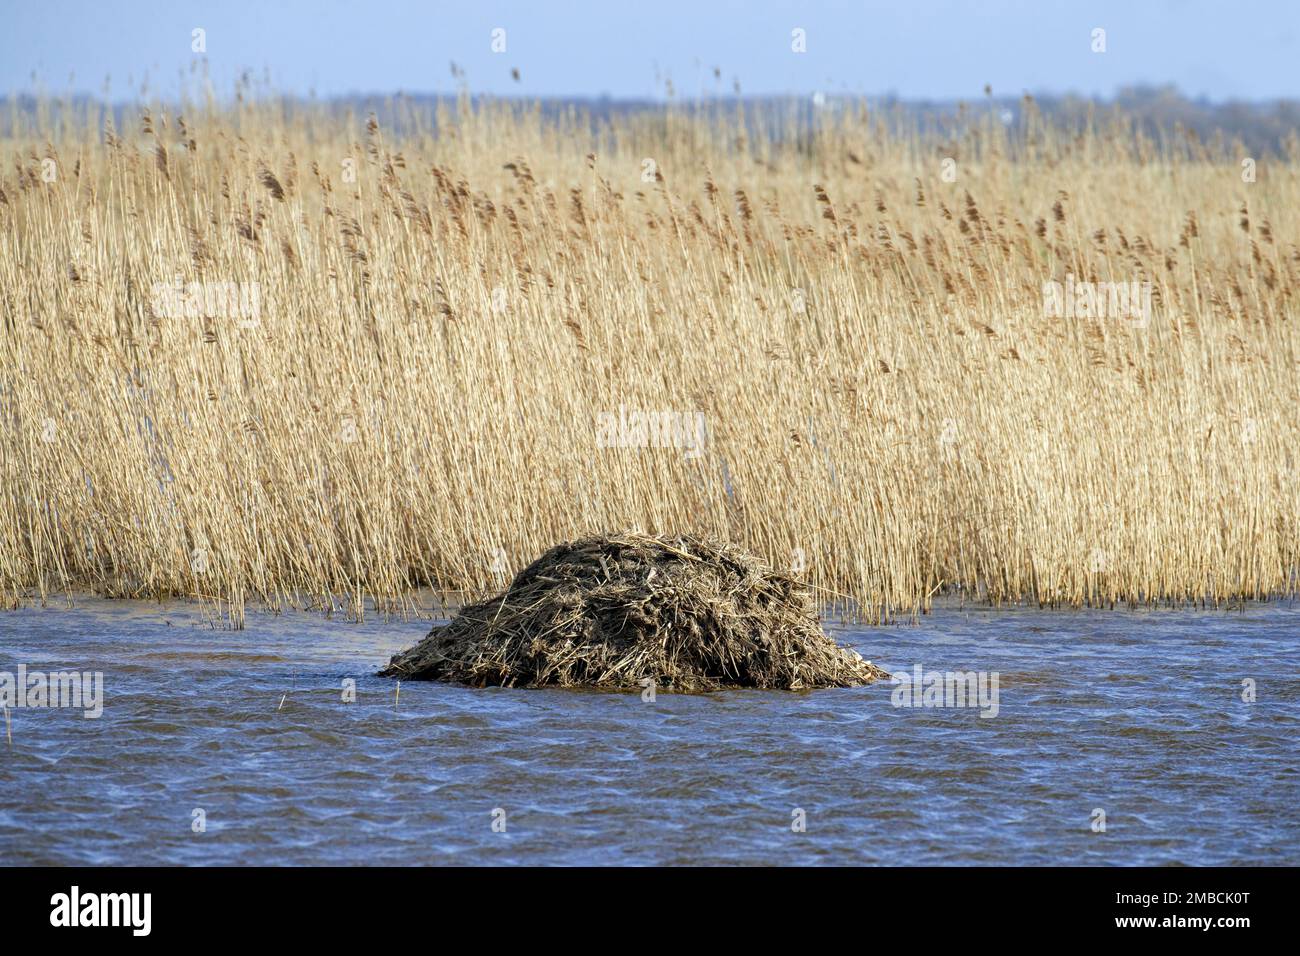 Muskrat (Ondatra zibethicus) lodge, nest build from reed and other vegetation in marshland / wetland / swamp Stock Photo